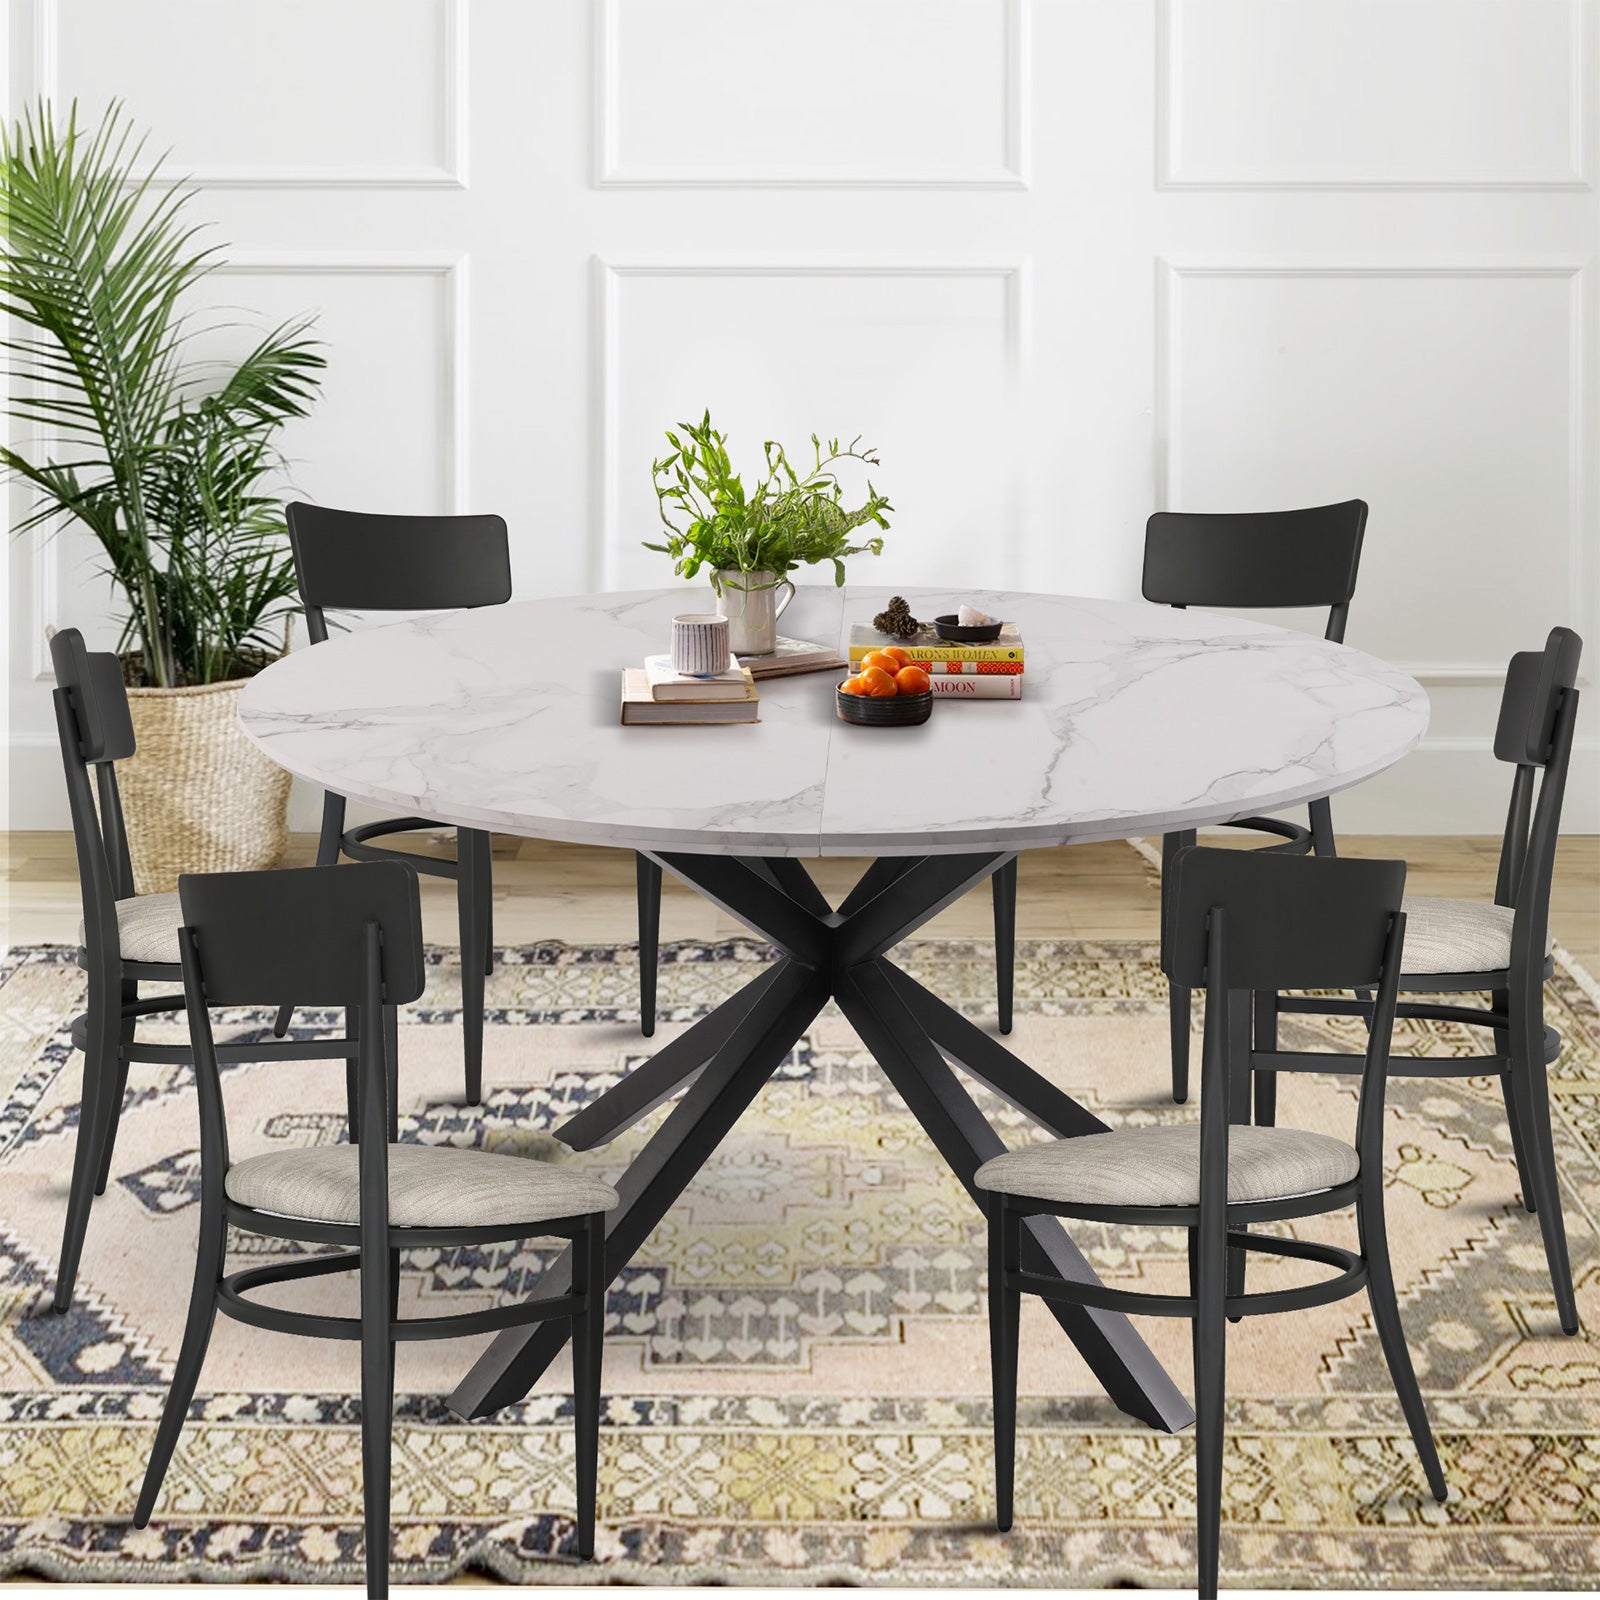 53" Round Mid-Century Modern Wooden Kitchen Dining Table for 4-6 with Solid Metal Leg, Marble Texture